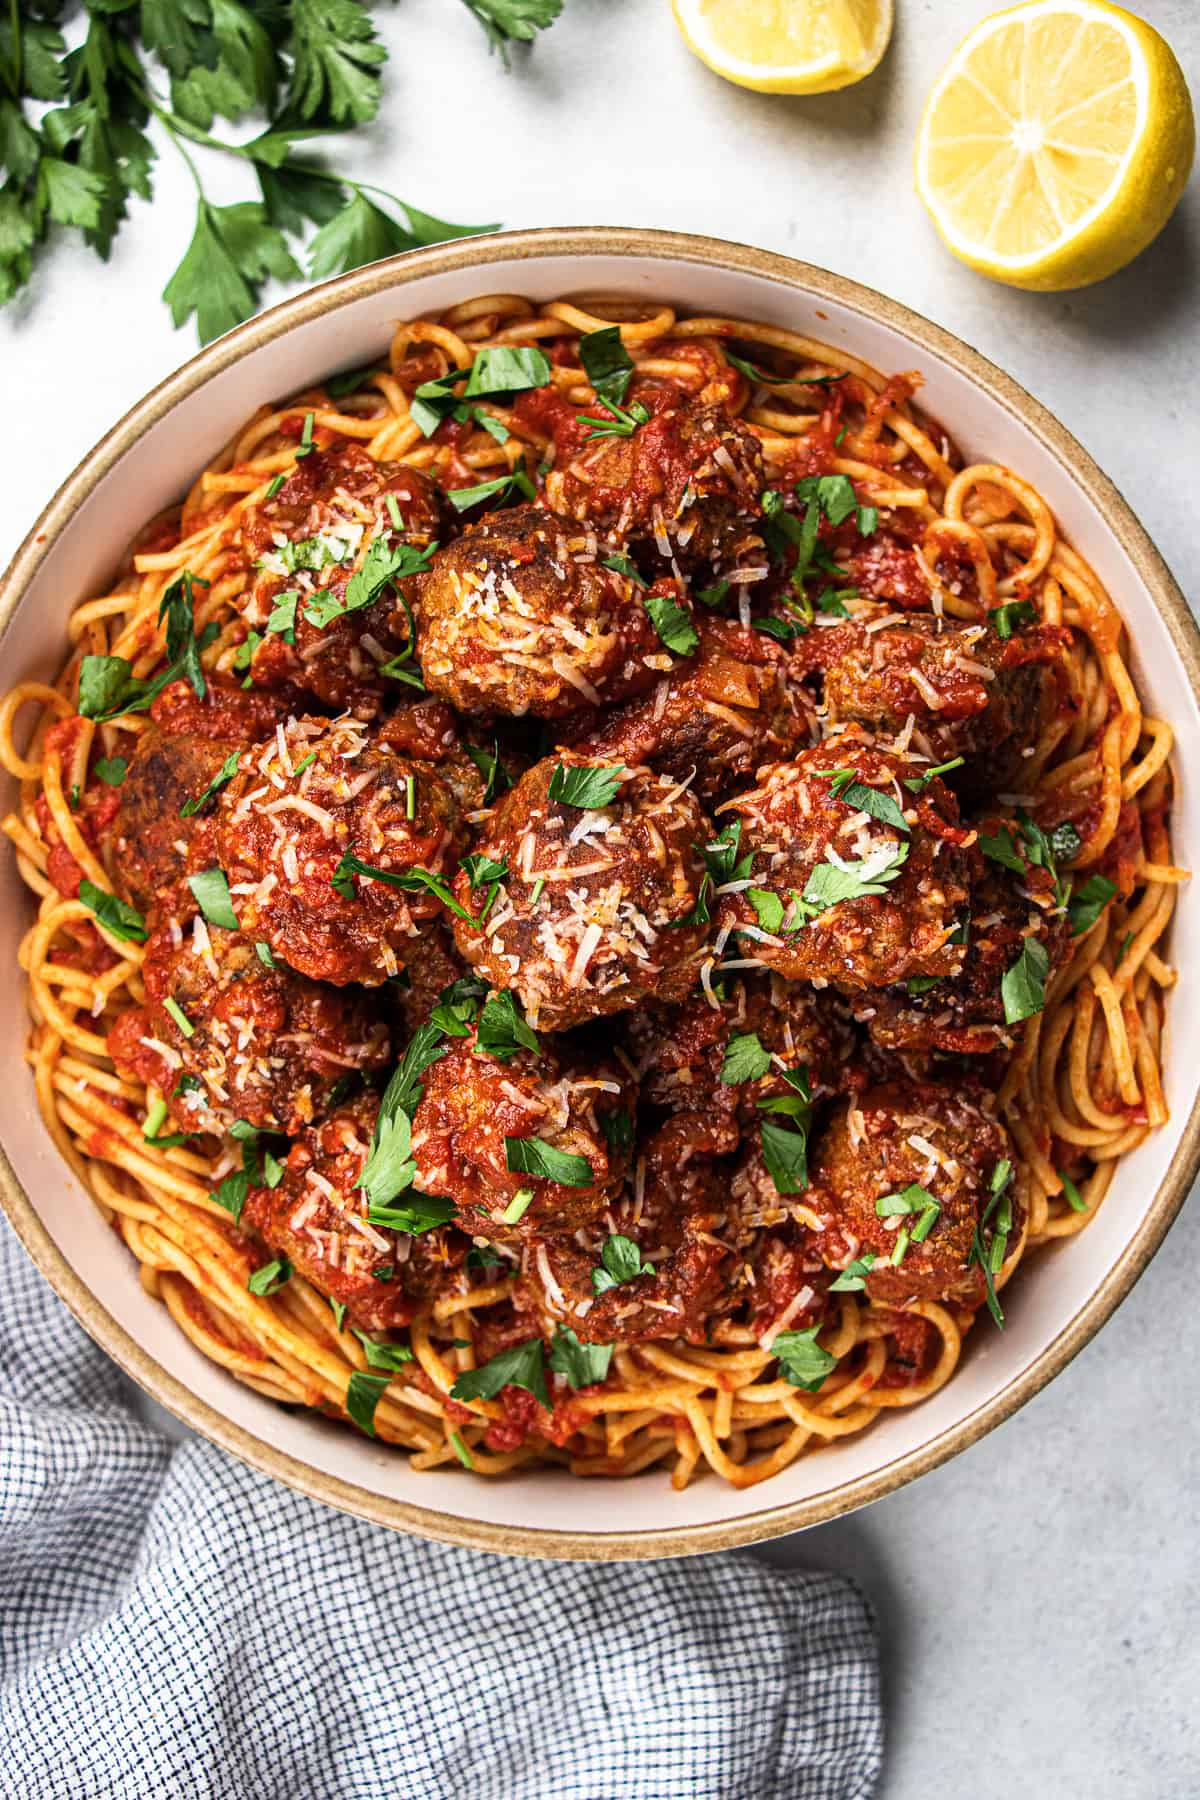 Spaghetti with meatballs, topped with parmesan and chopped parsley, in a large bowl.